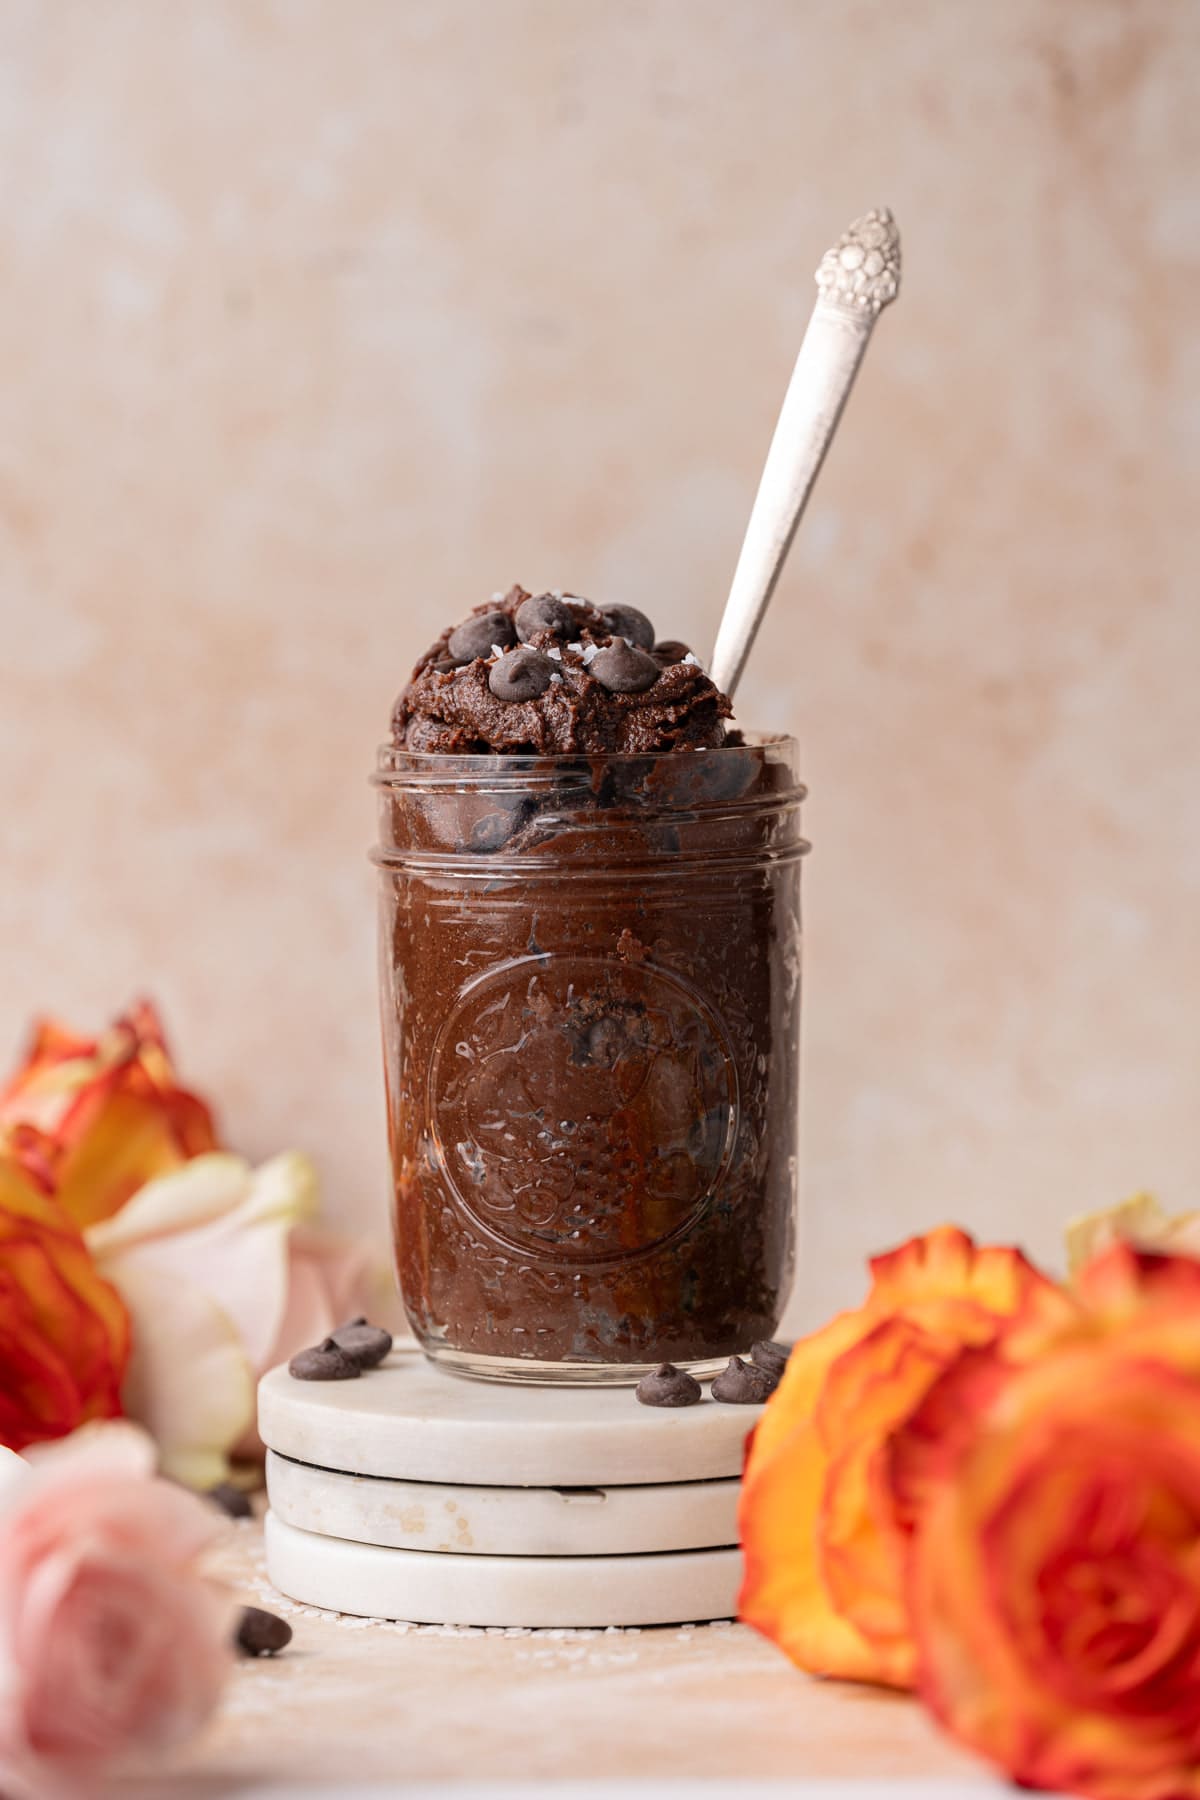 Brownie batter in a jar surrounded by roses